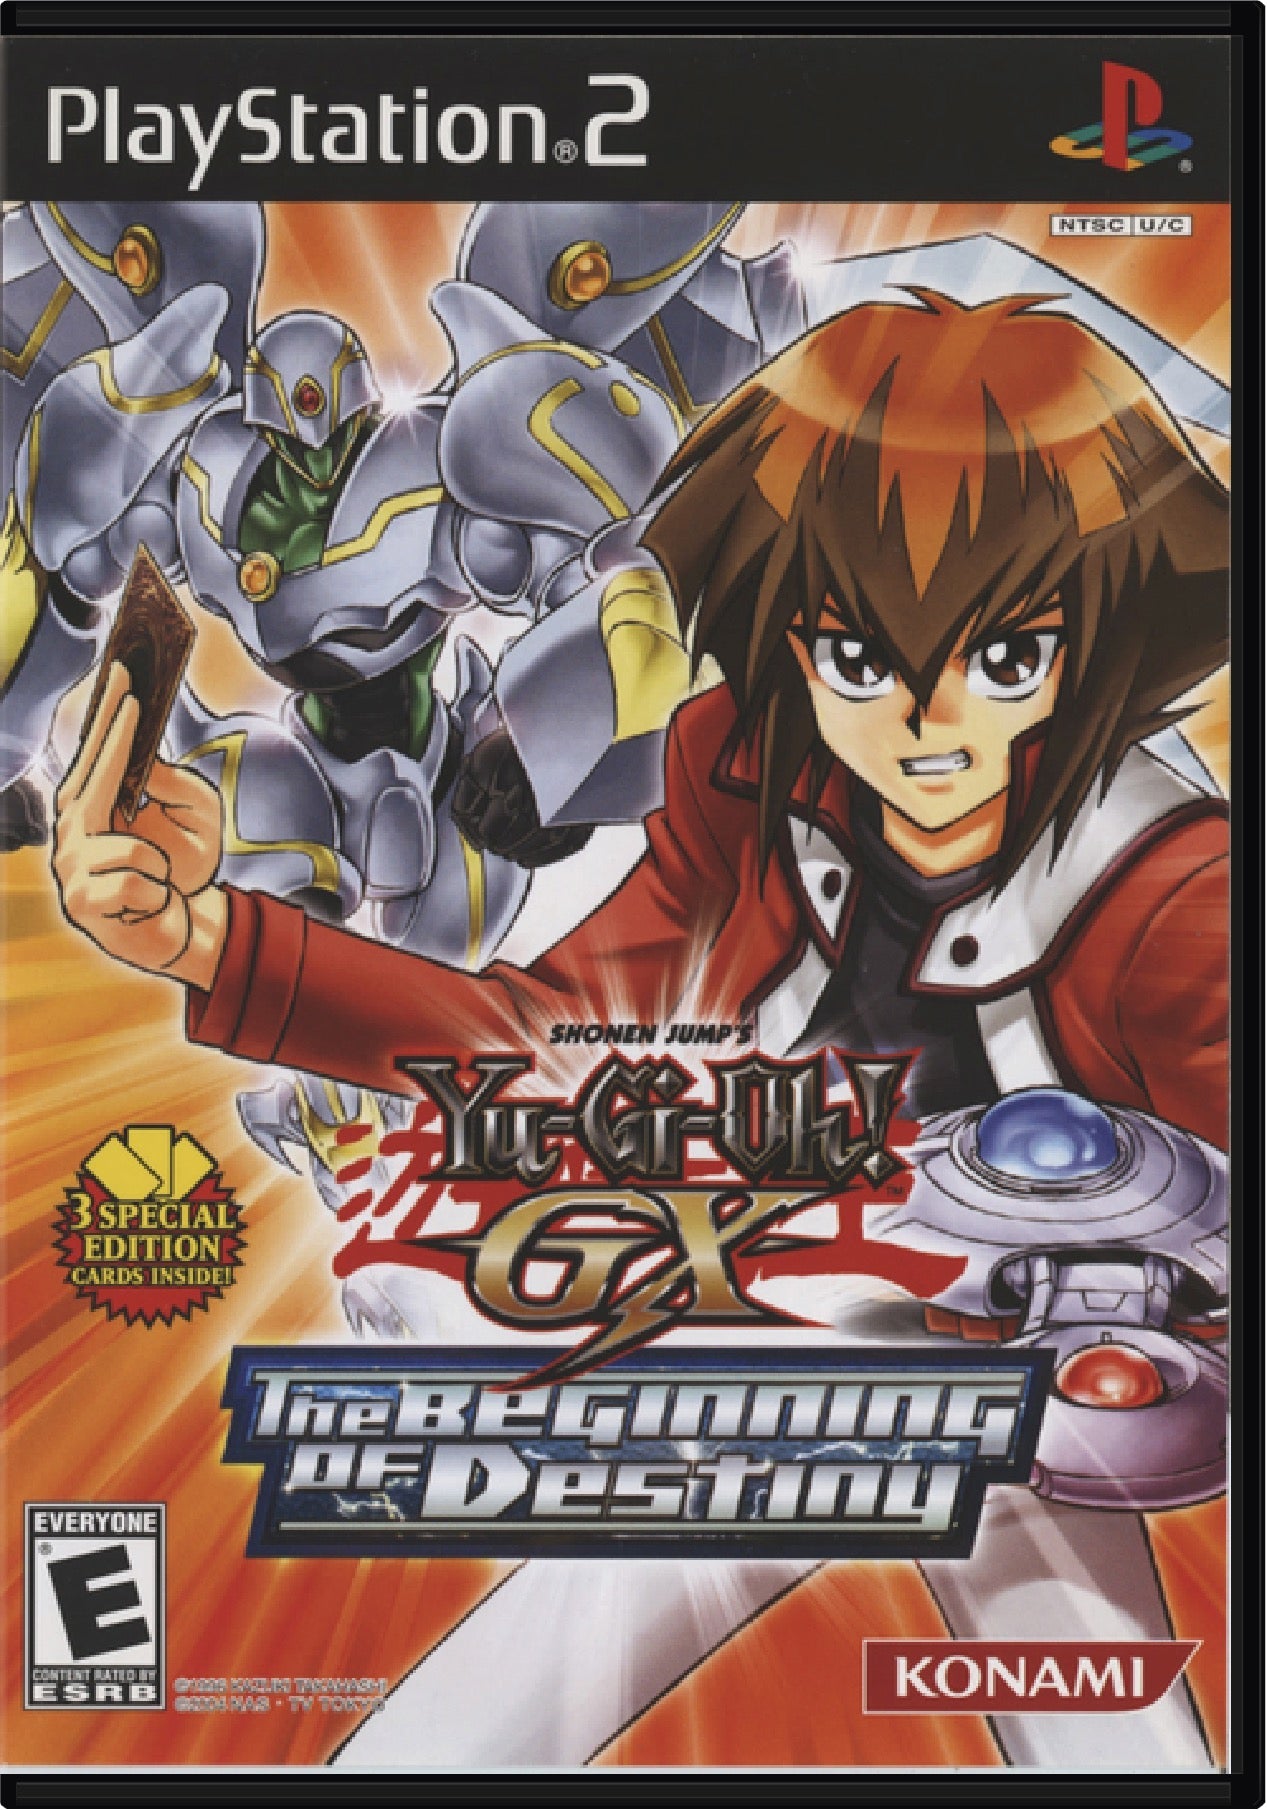 Yu-Gi-Oh GX The Beginning of Destiny Cover Art and Product Photo